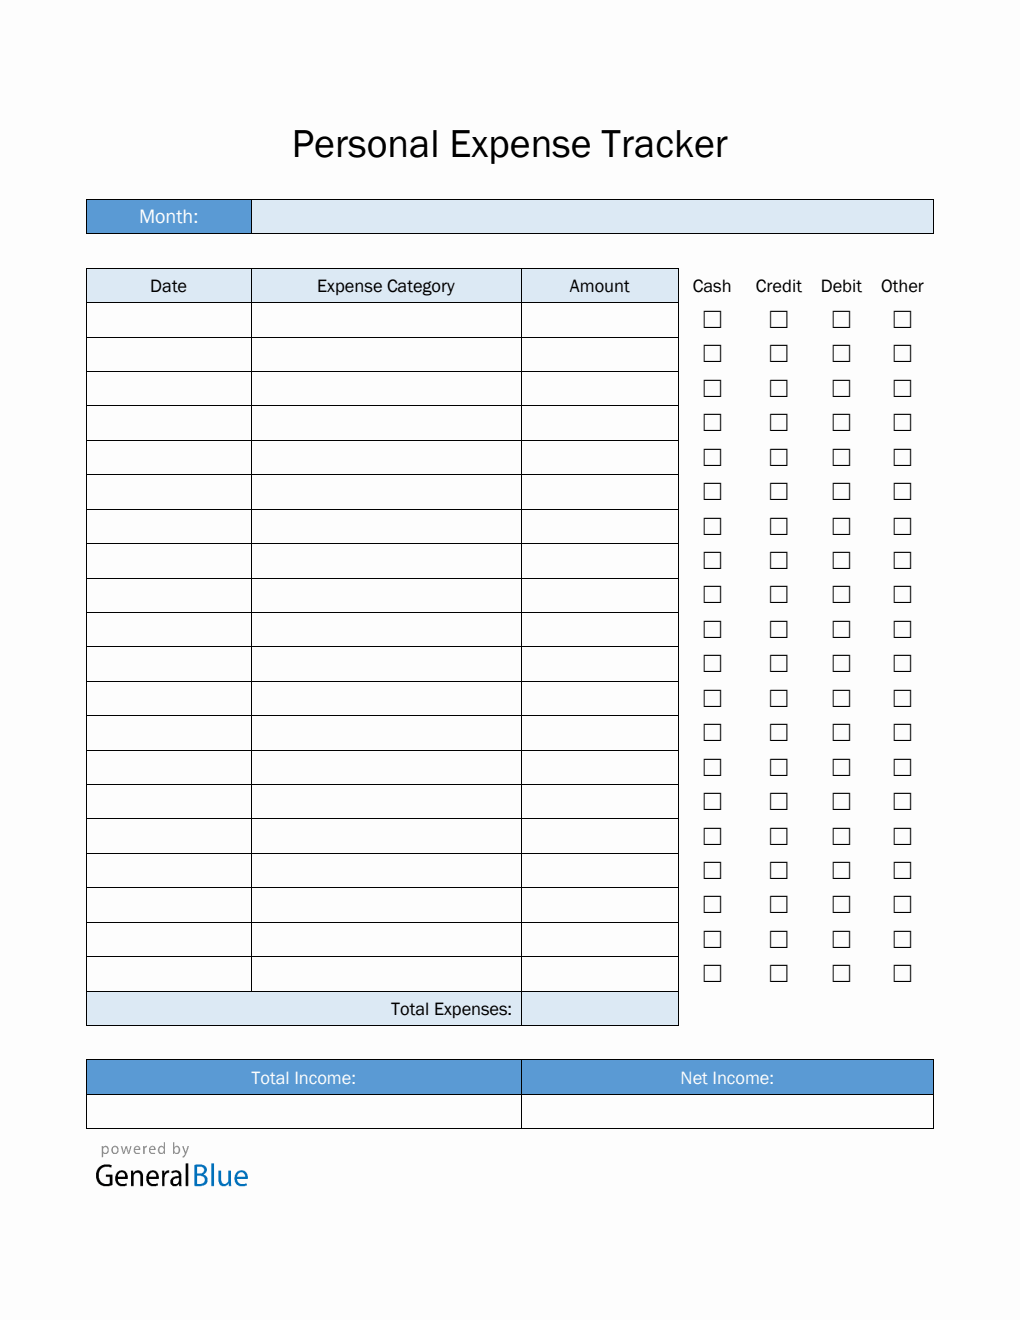 Personal Expense Tracker in Word (Blue)